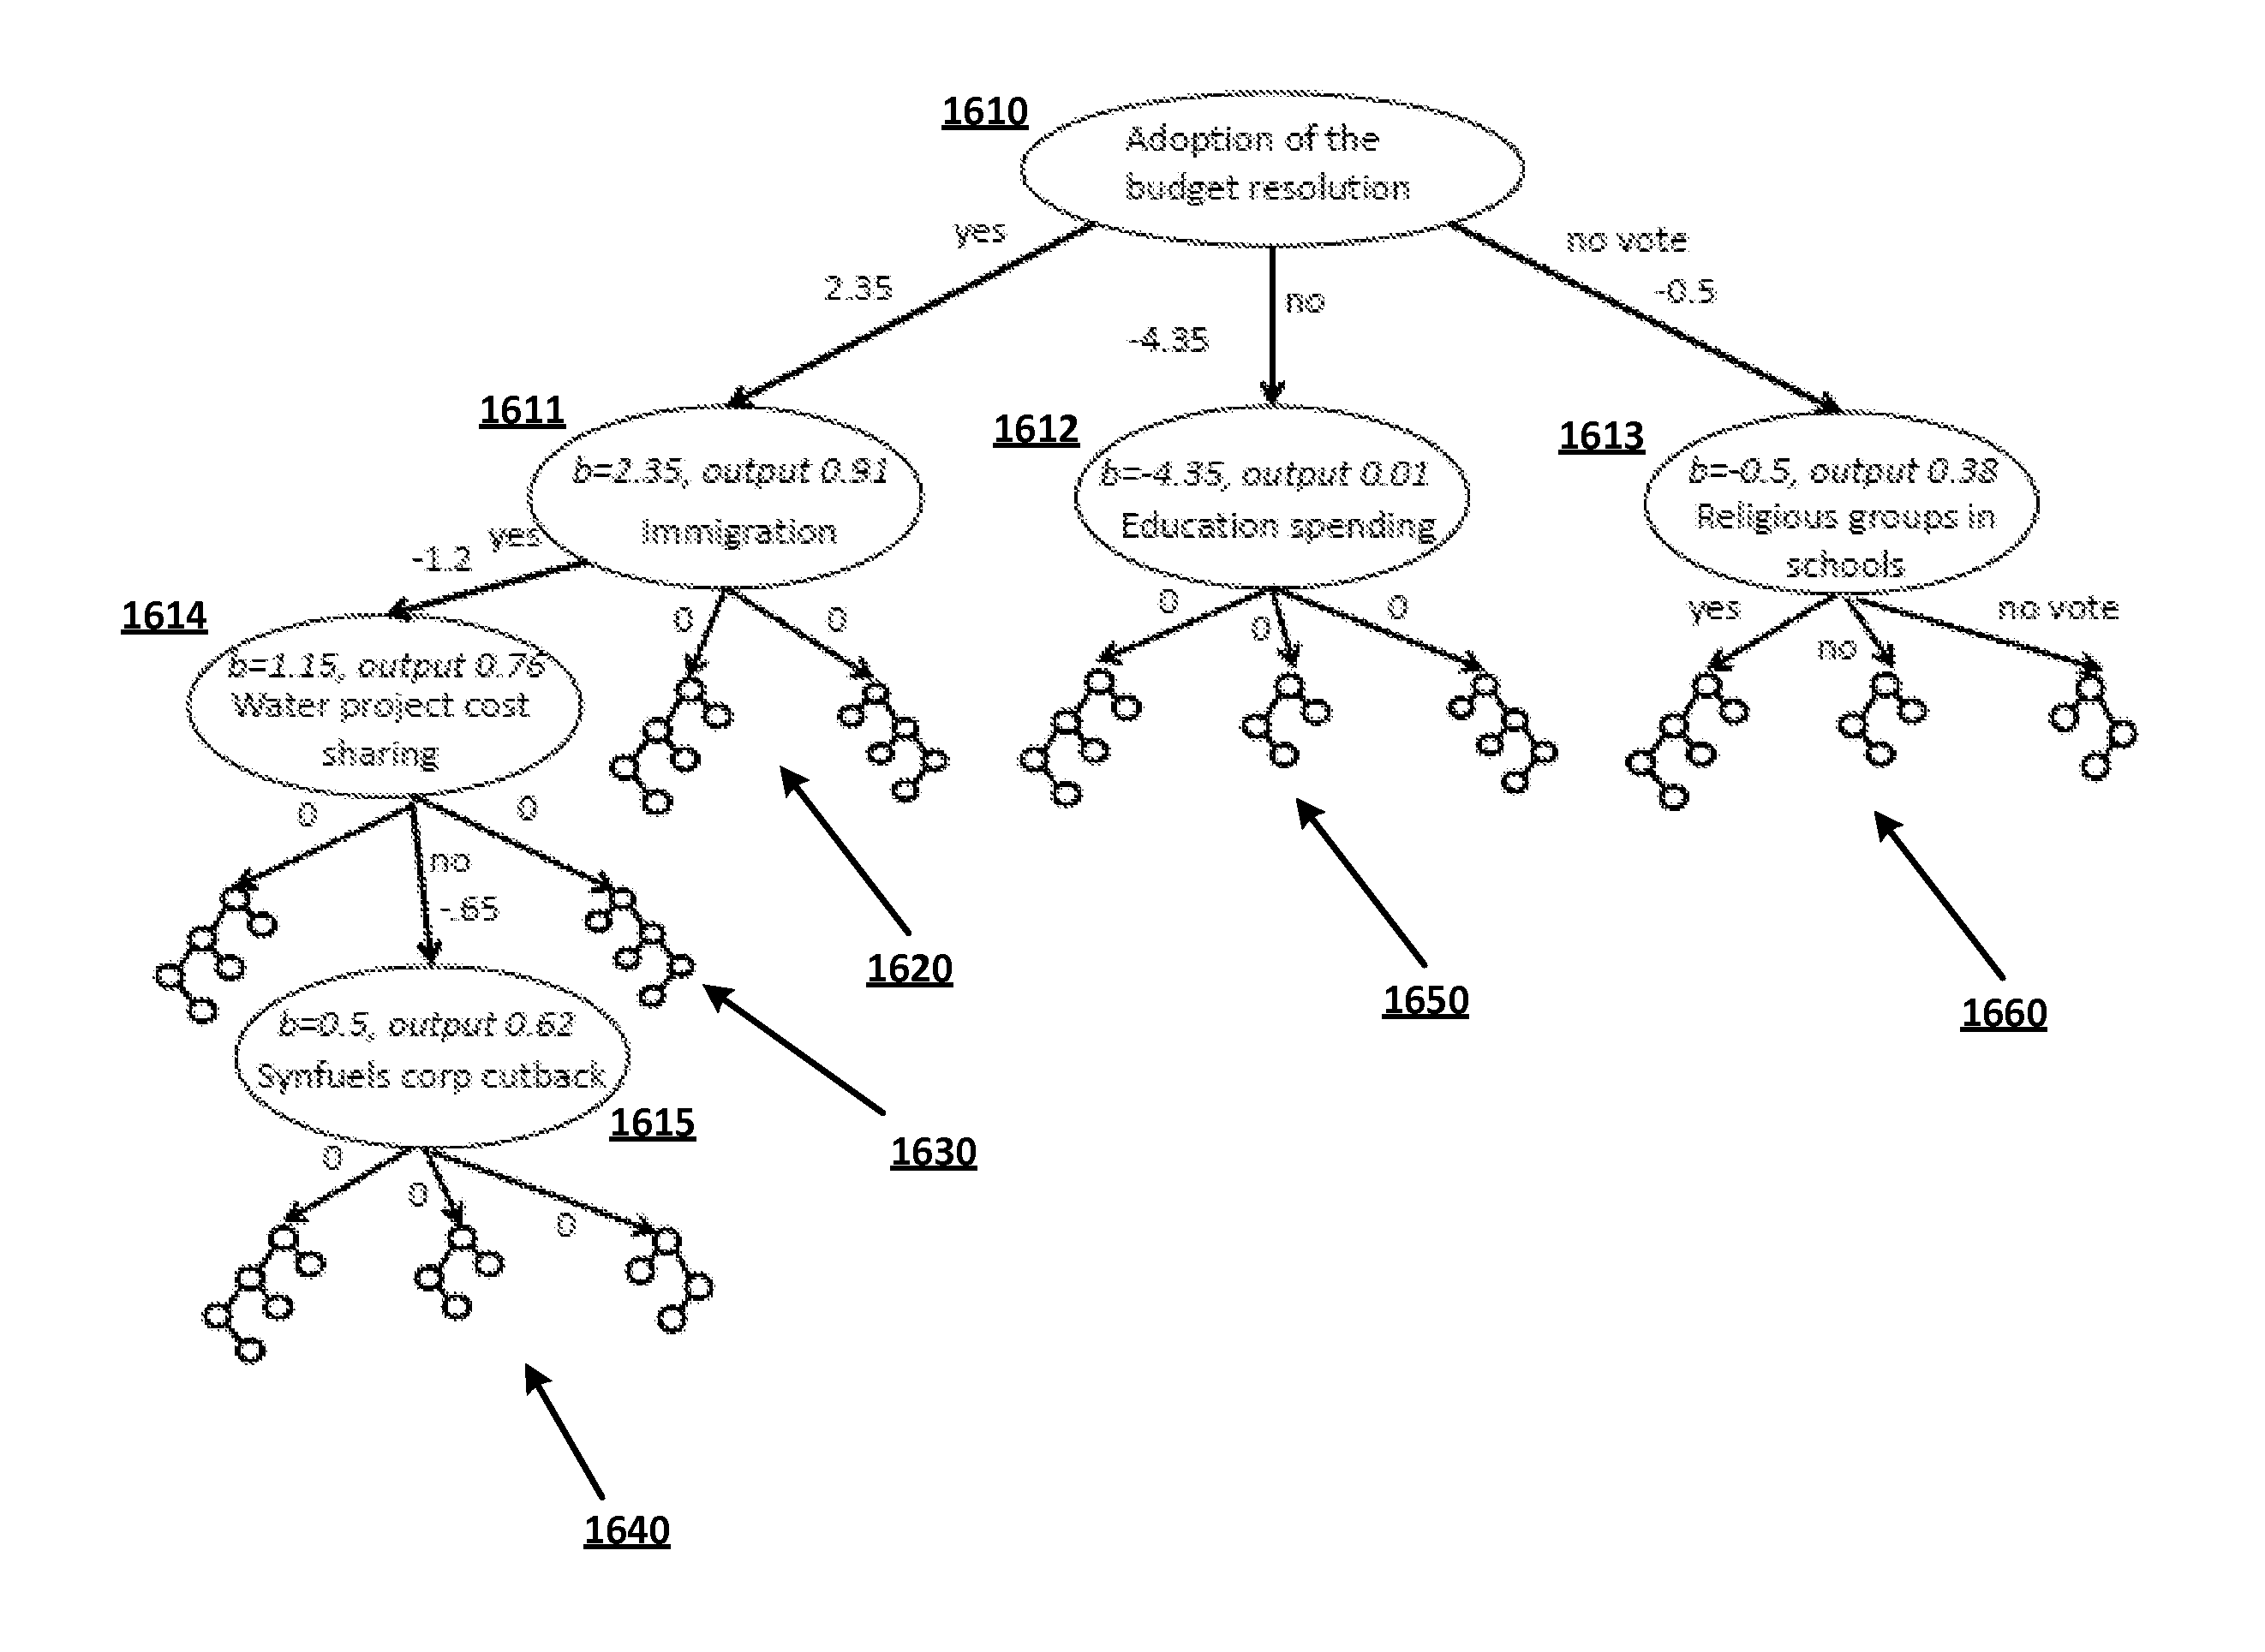 Growth and use of self-terminating prediction trees